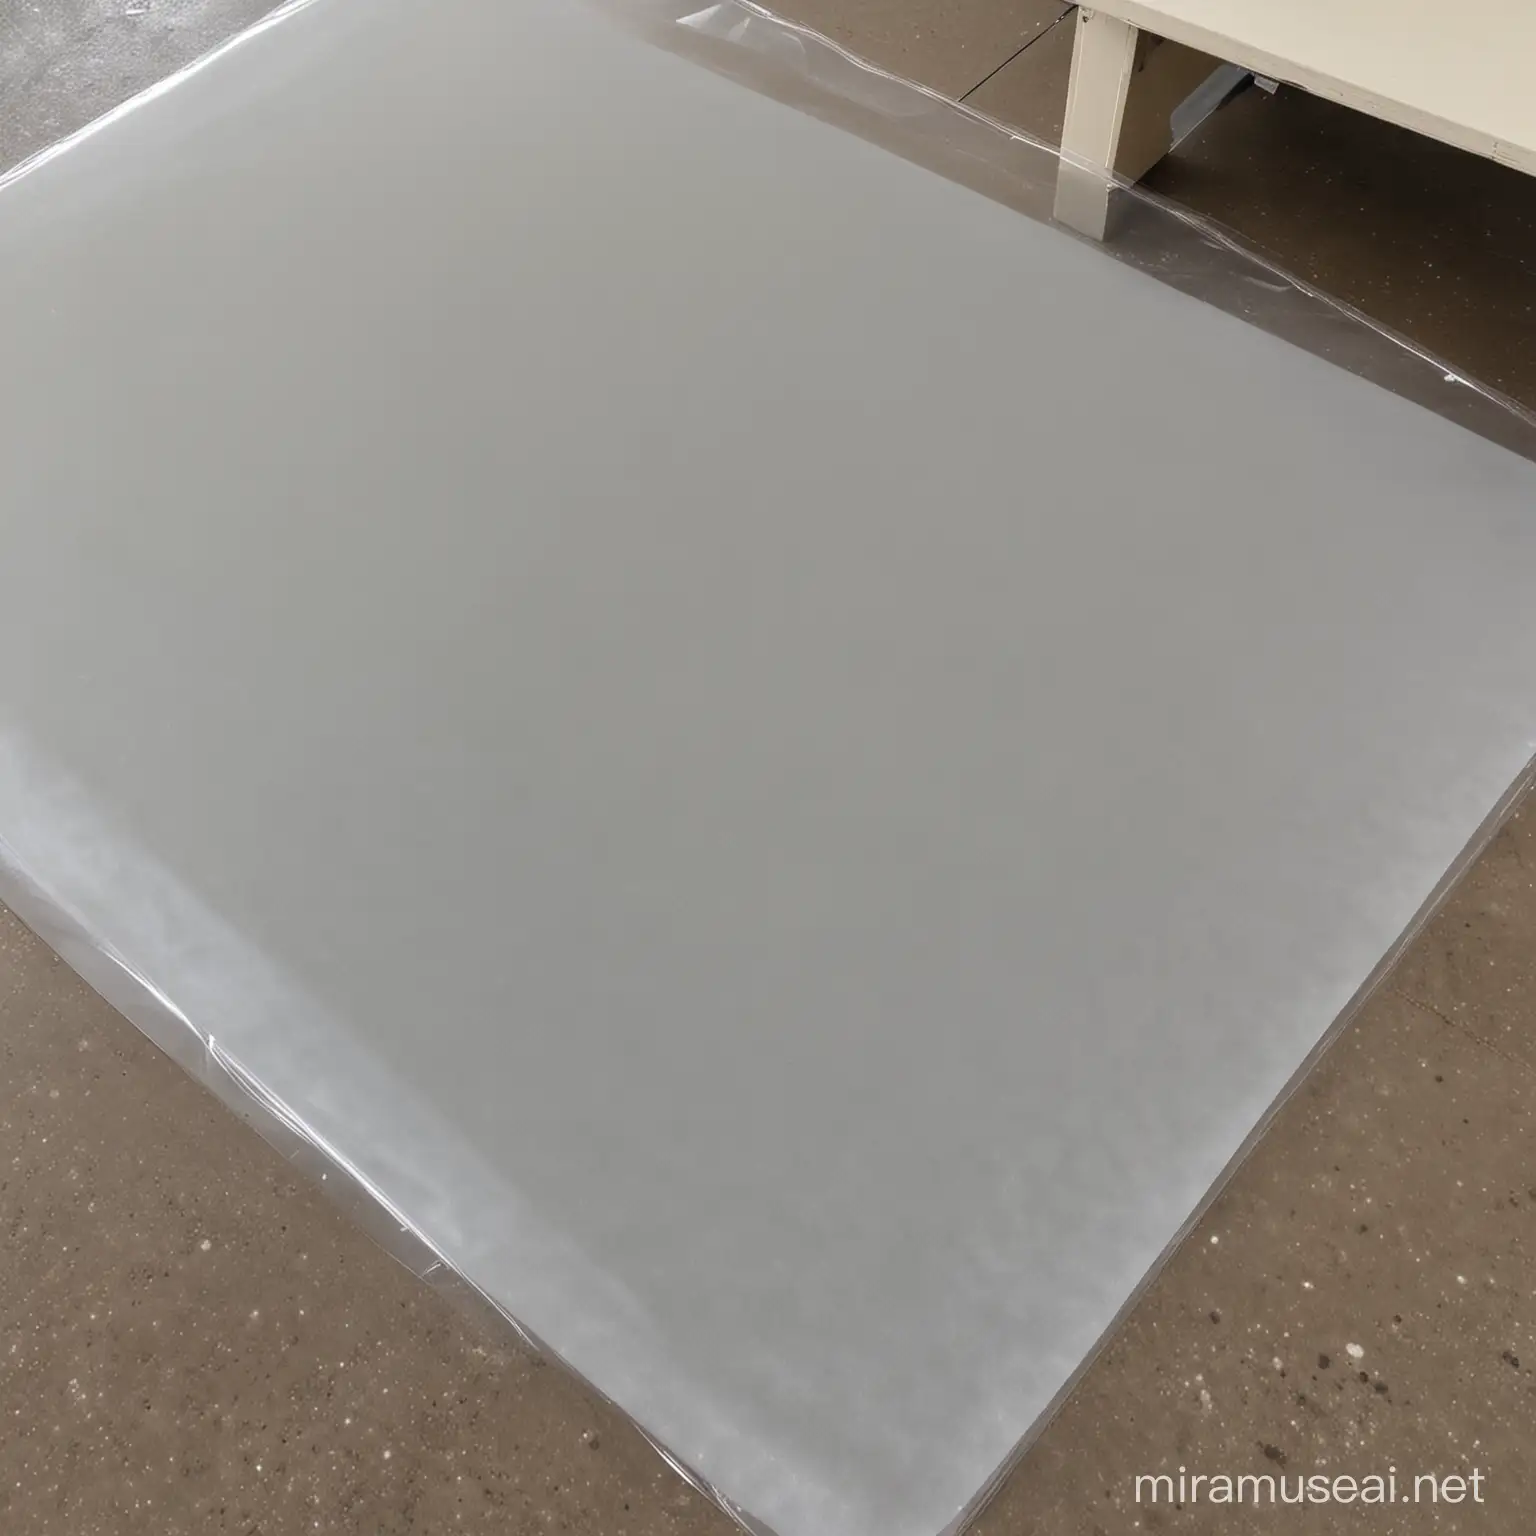 neat and clean work space with plastic sheet and silicon mat